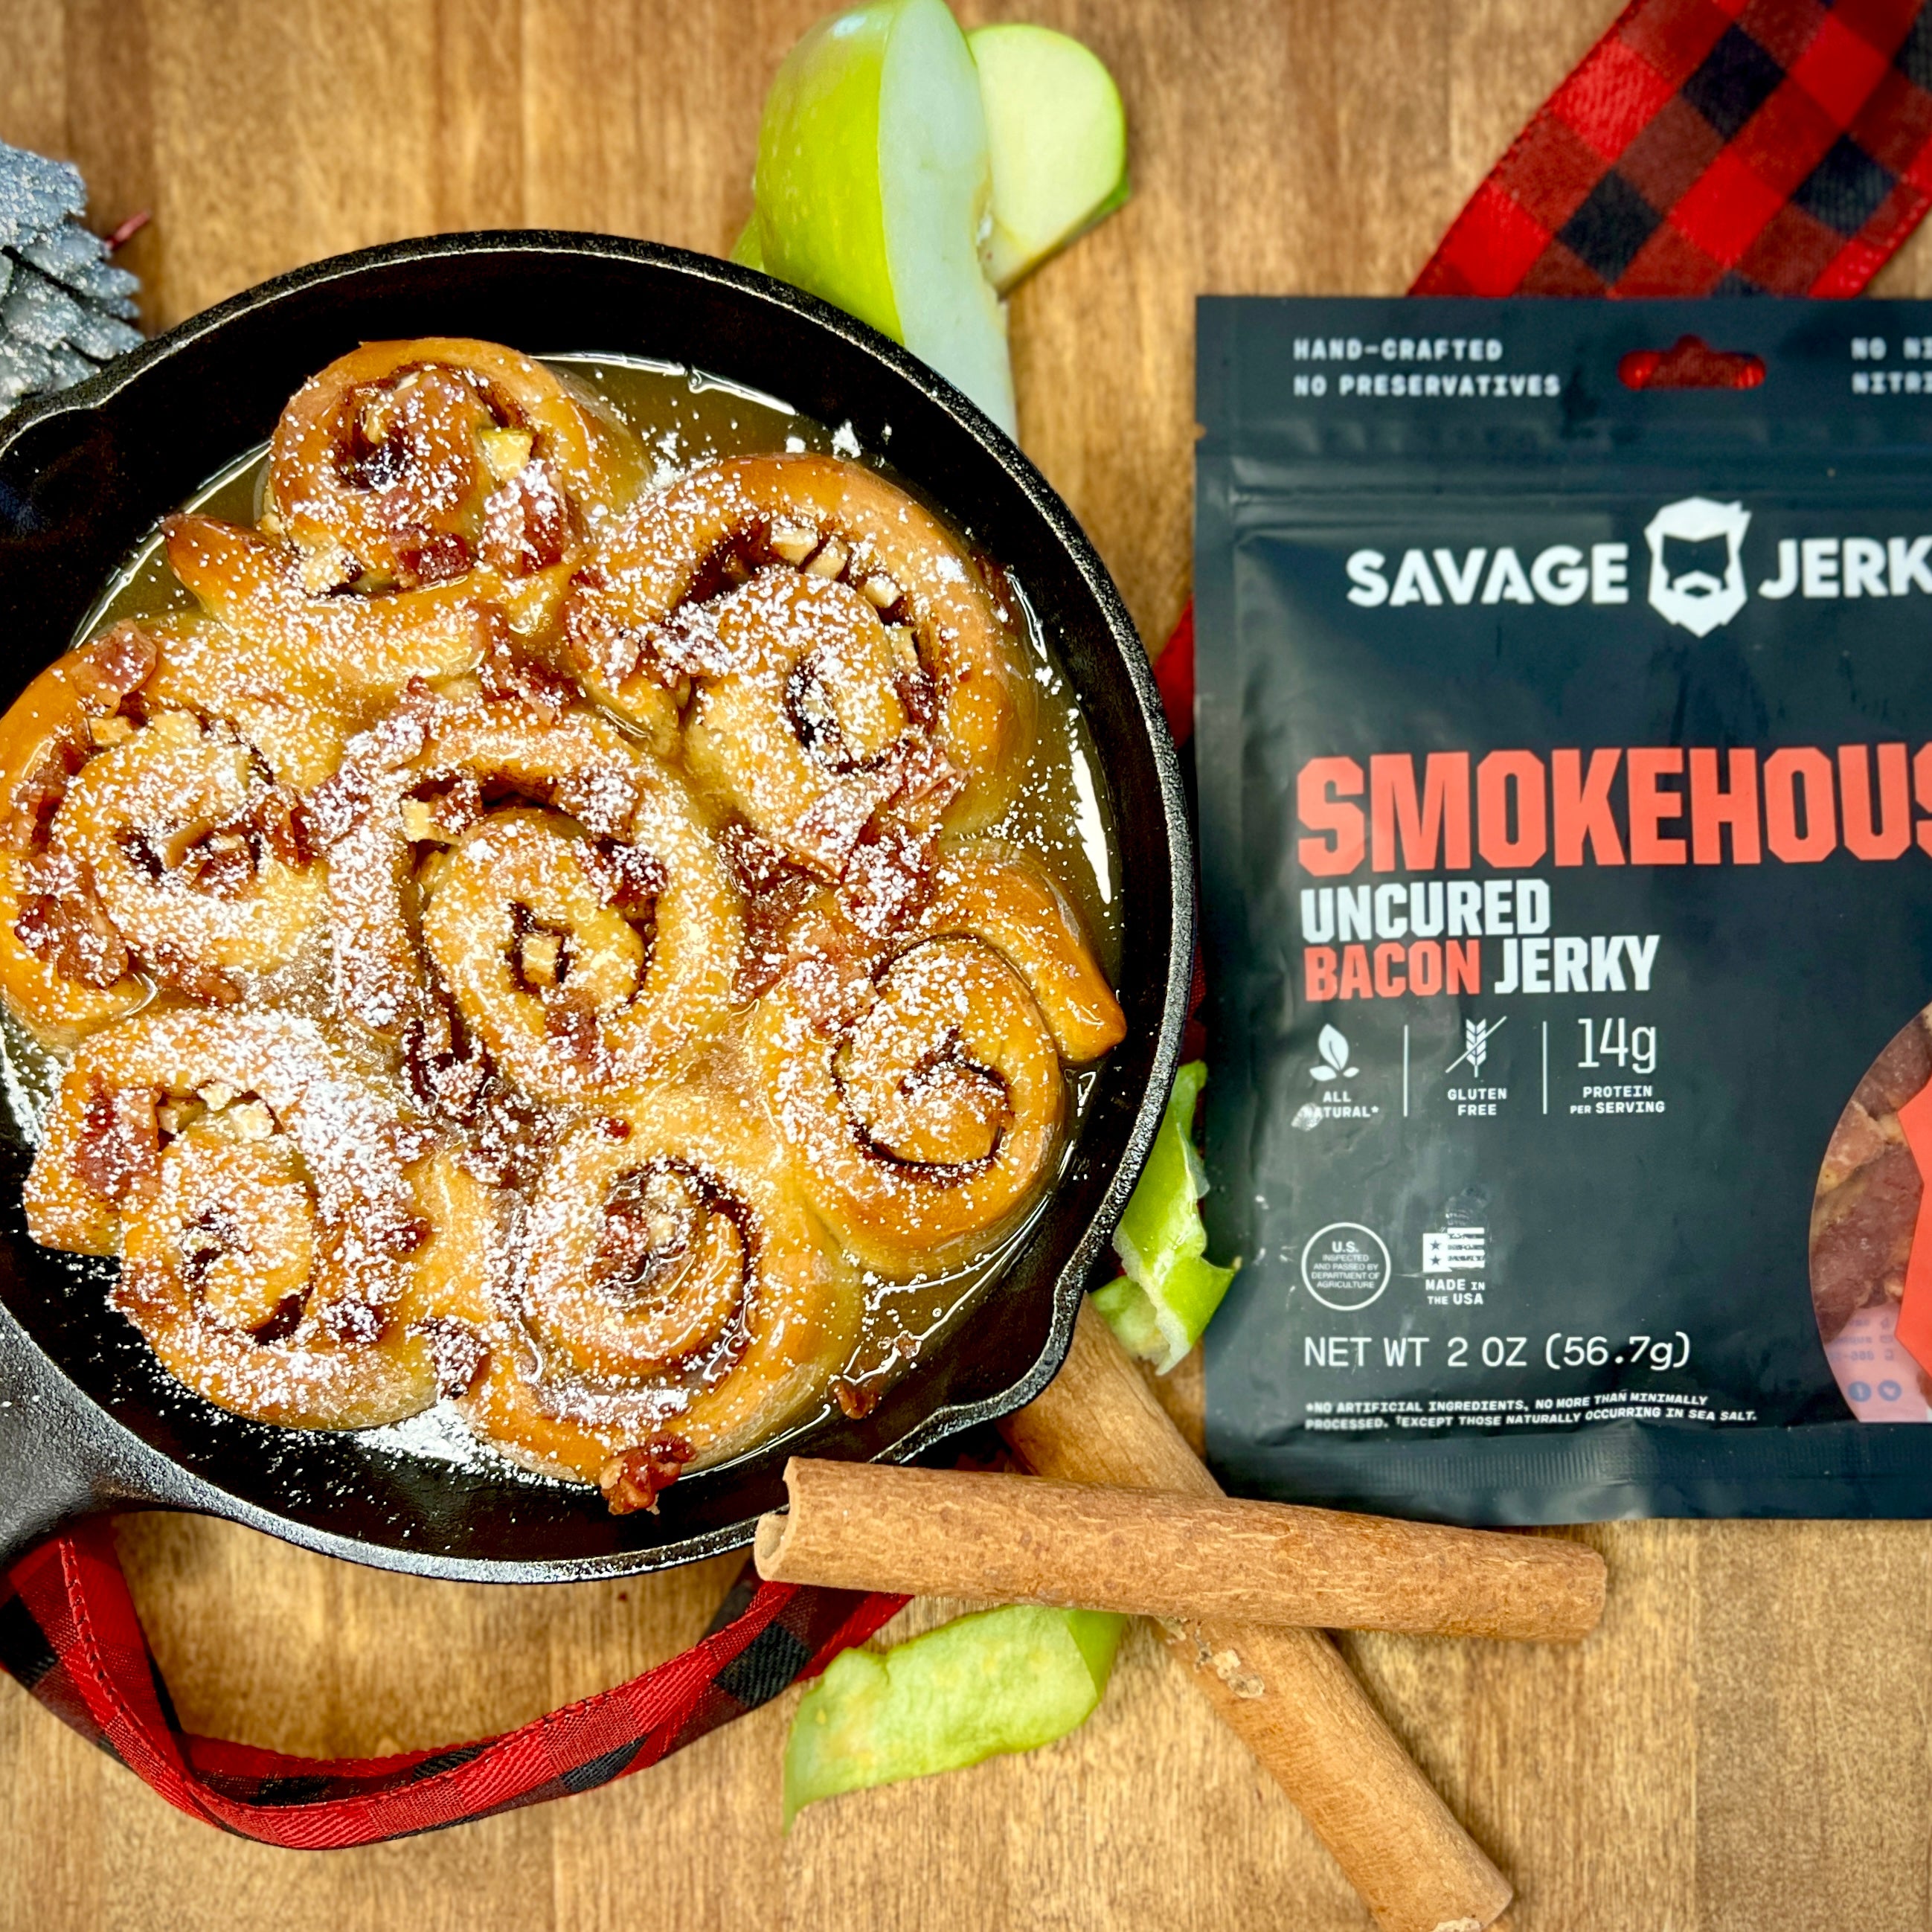 Caramel Apple Cider Cinnamon Rolls with Smokehouse Bacon Jerky Crumbles